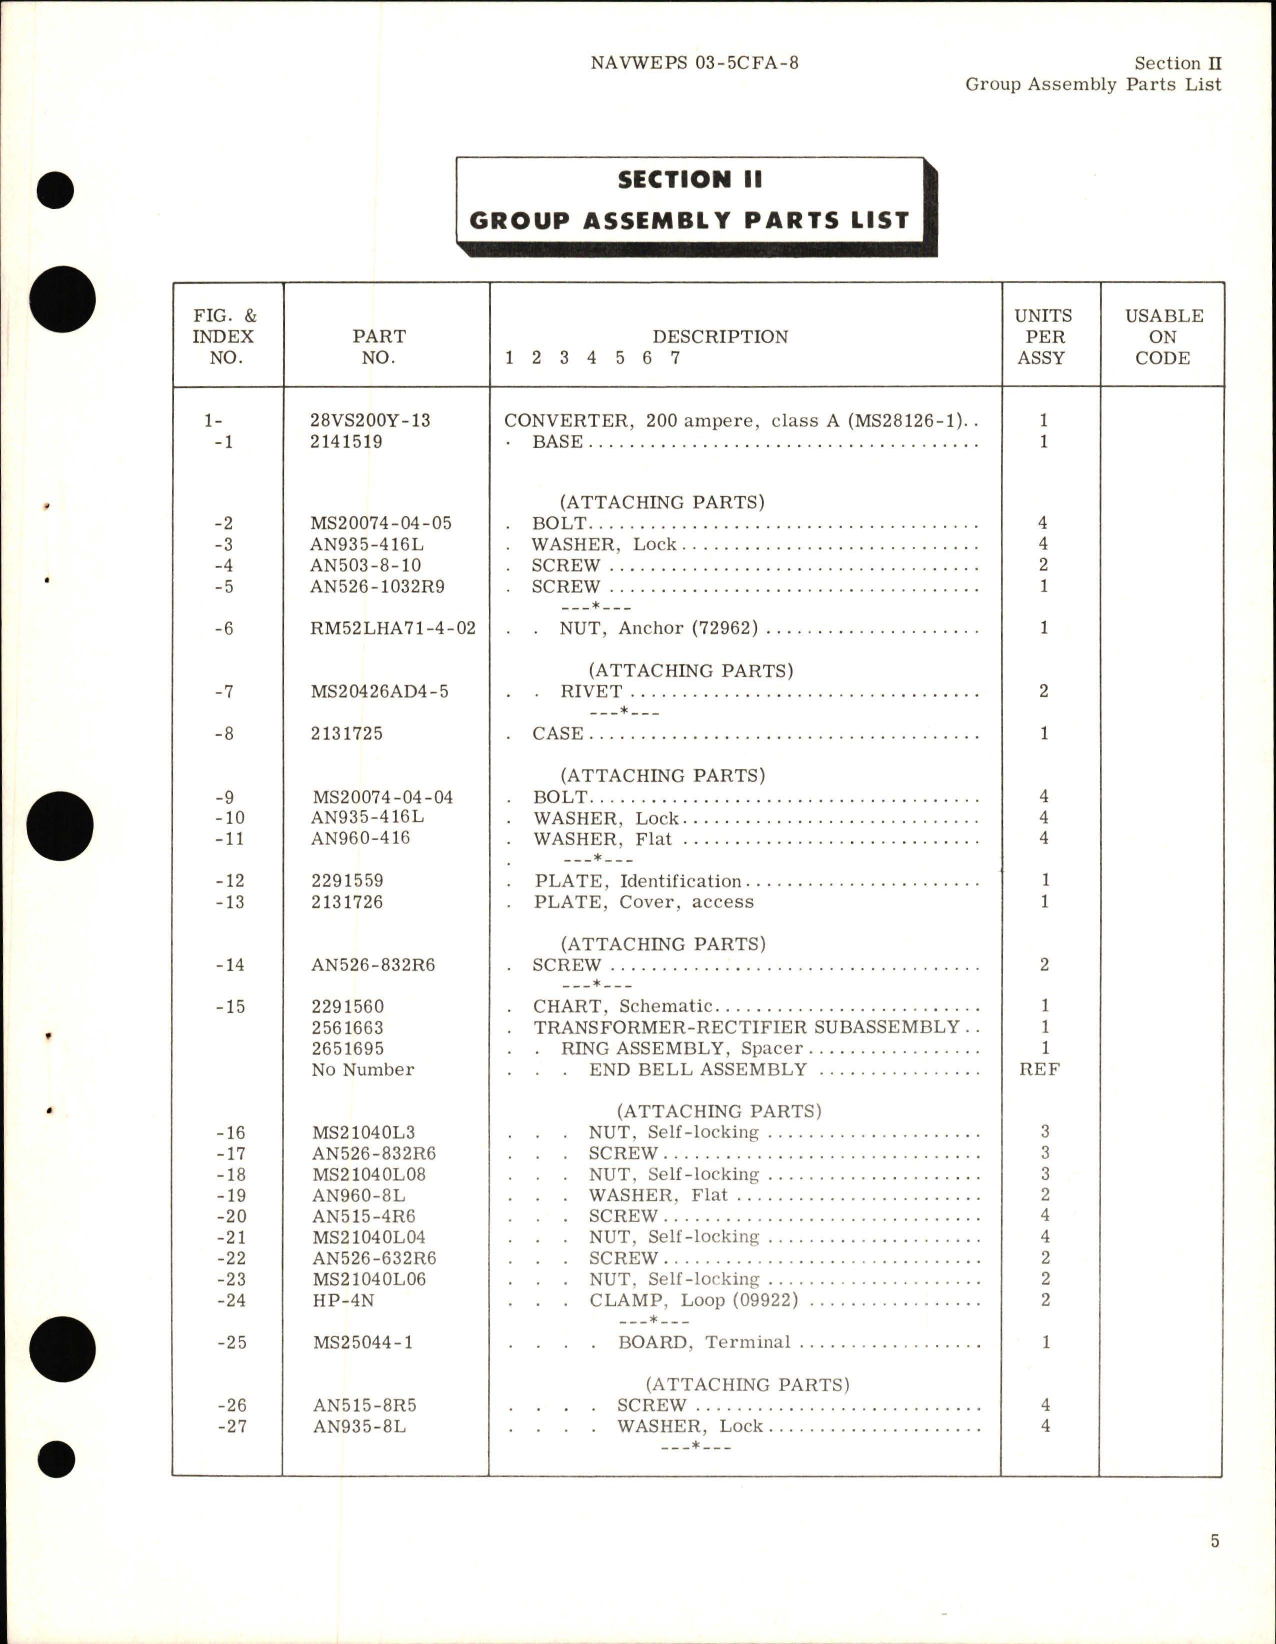 Sample page 7 from AirCorps Library document: Illustrated Parts Breakdown for Class A Converter, 200 Ampere - Part 28VS200Y-13 - Type MS28126-1 